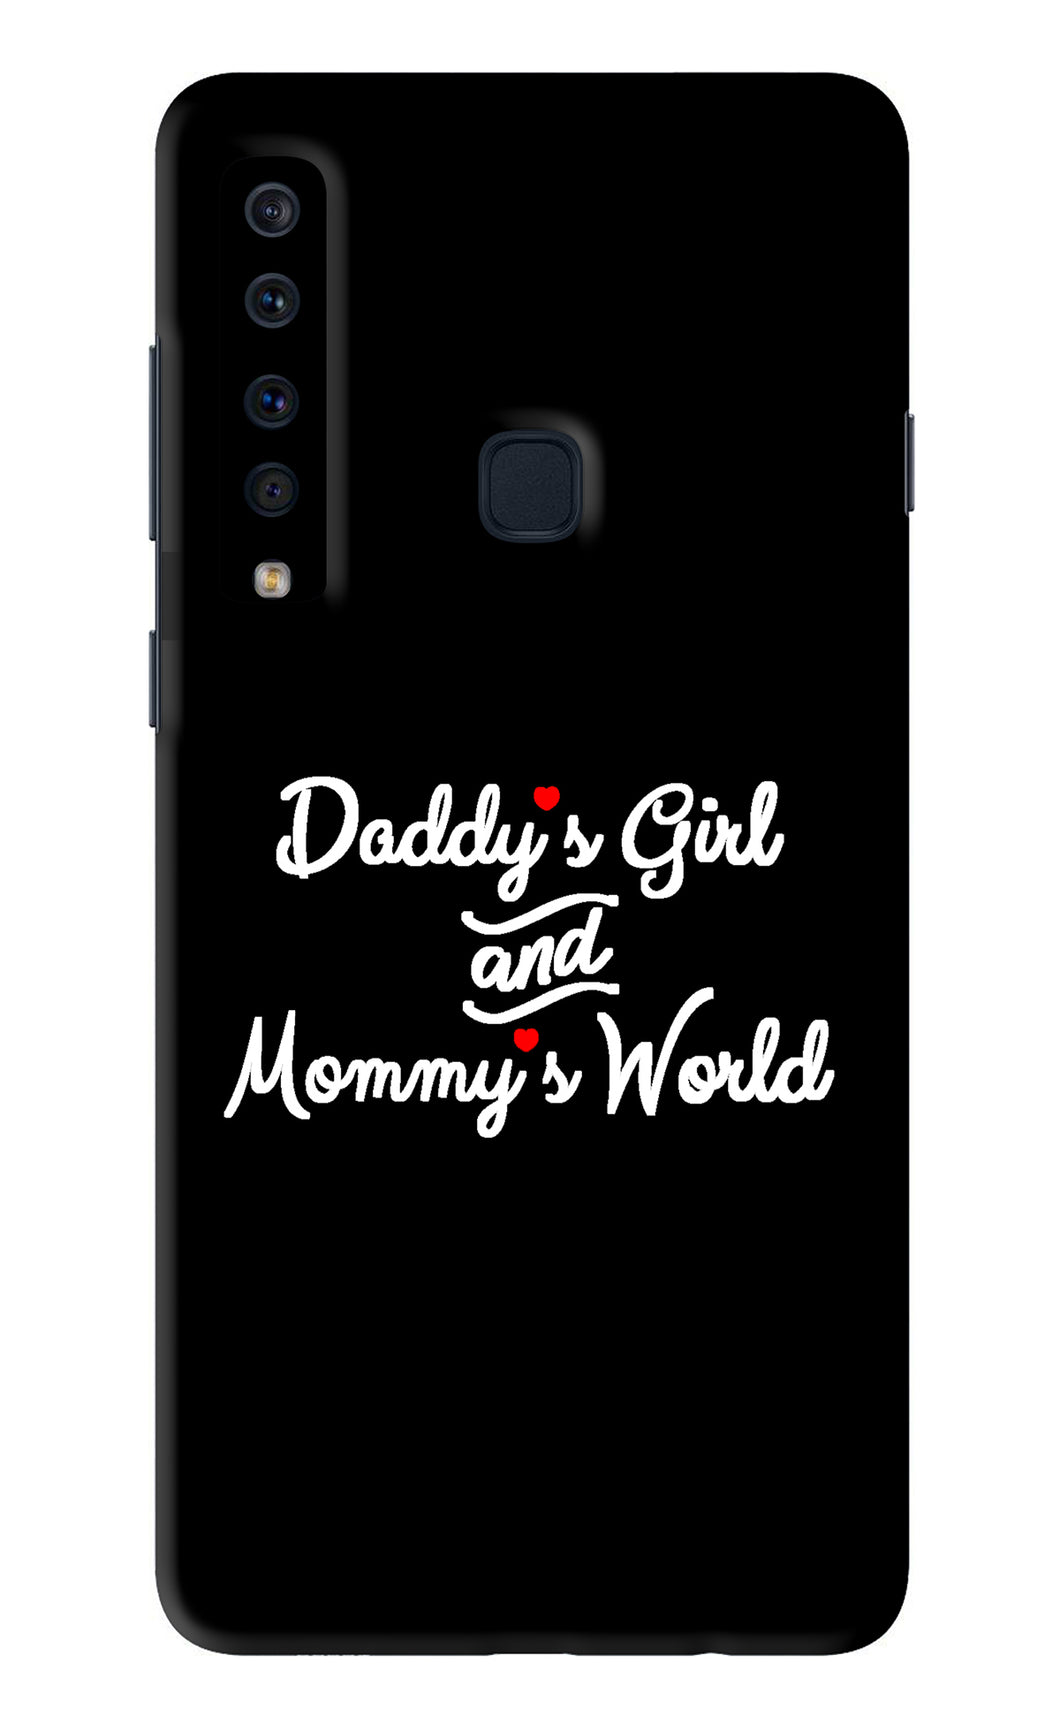 Daddy's Girl and Mommy's World Samsung Galaxy A9 Back Skin Wrap